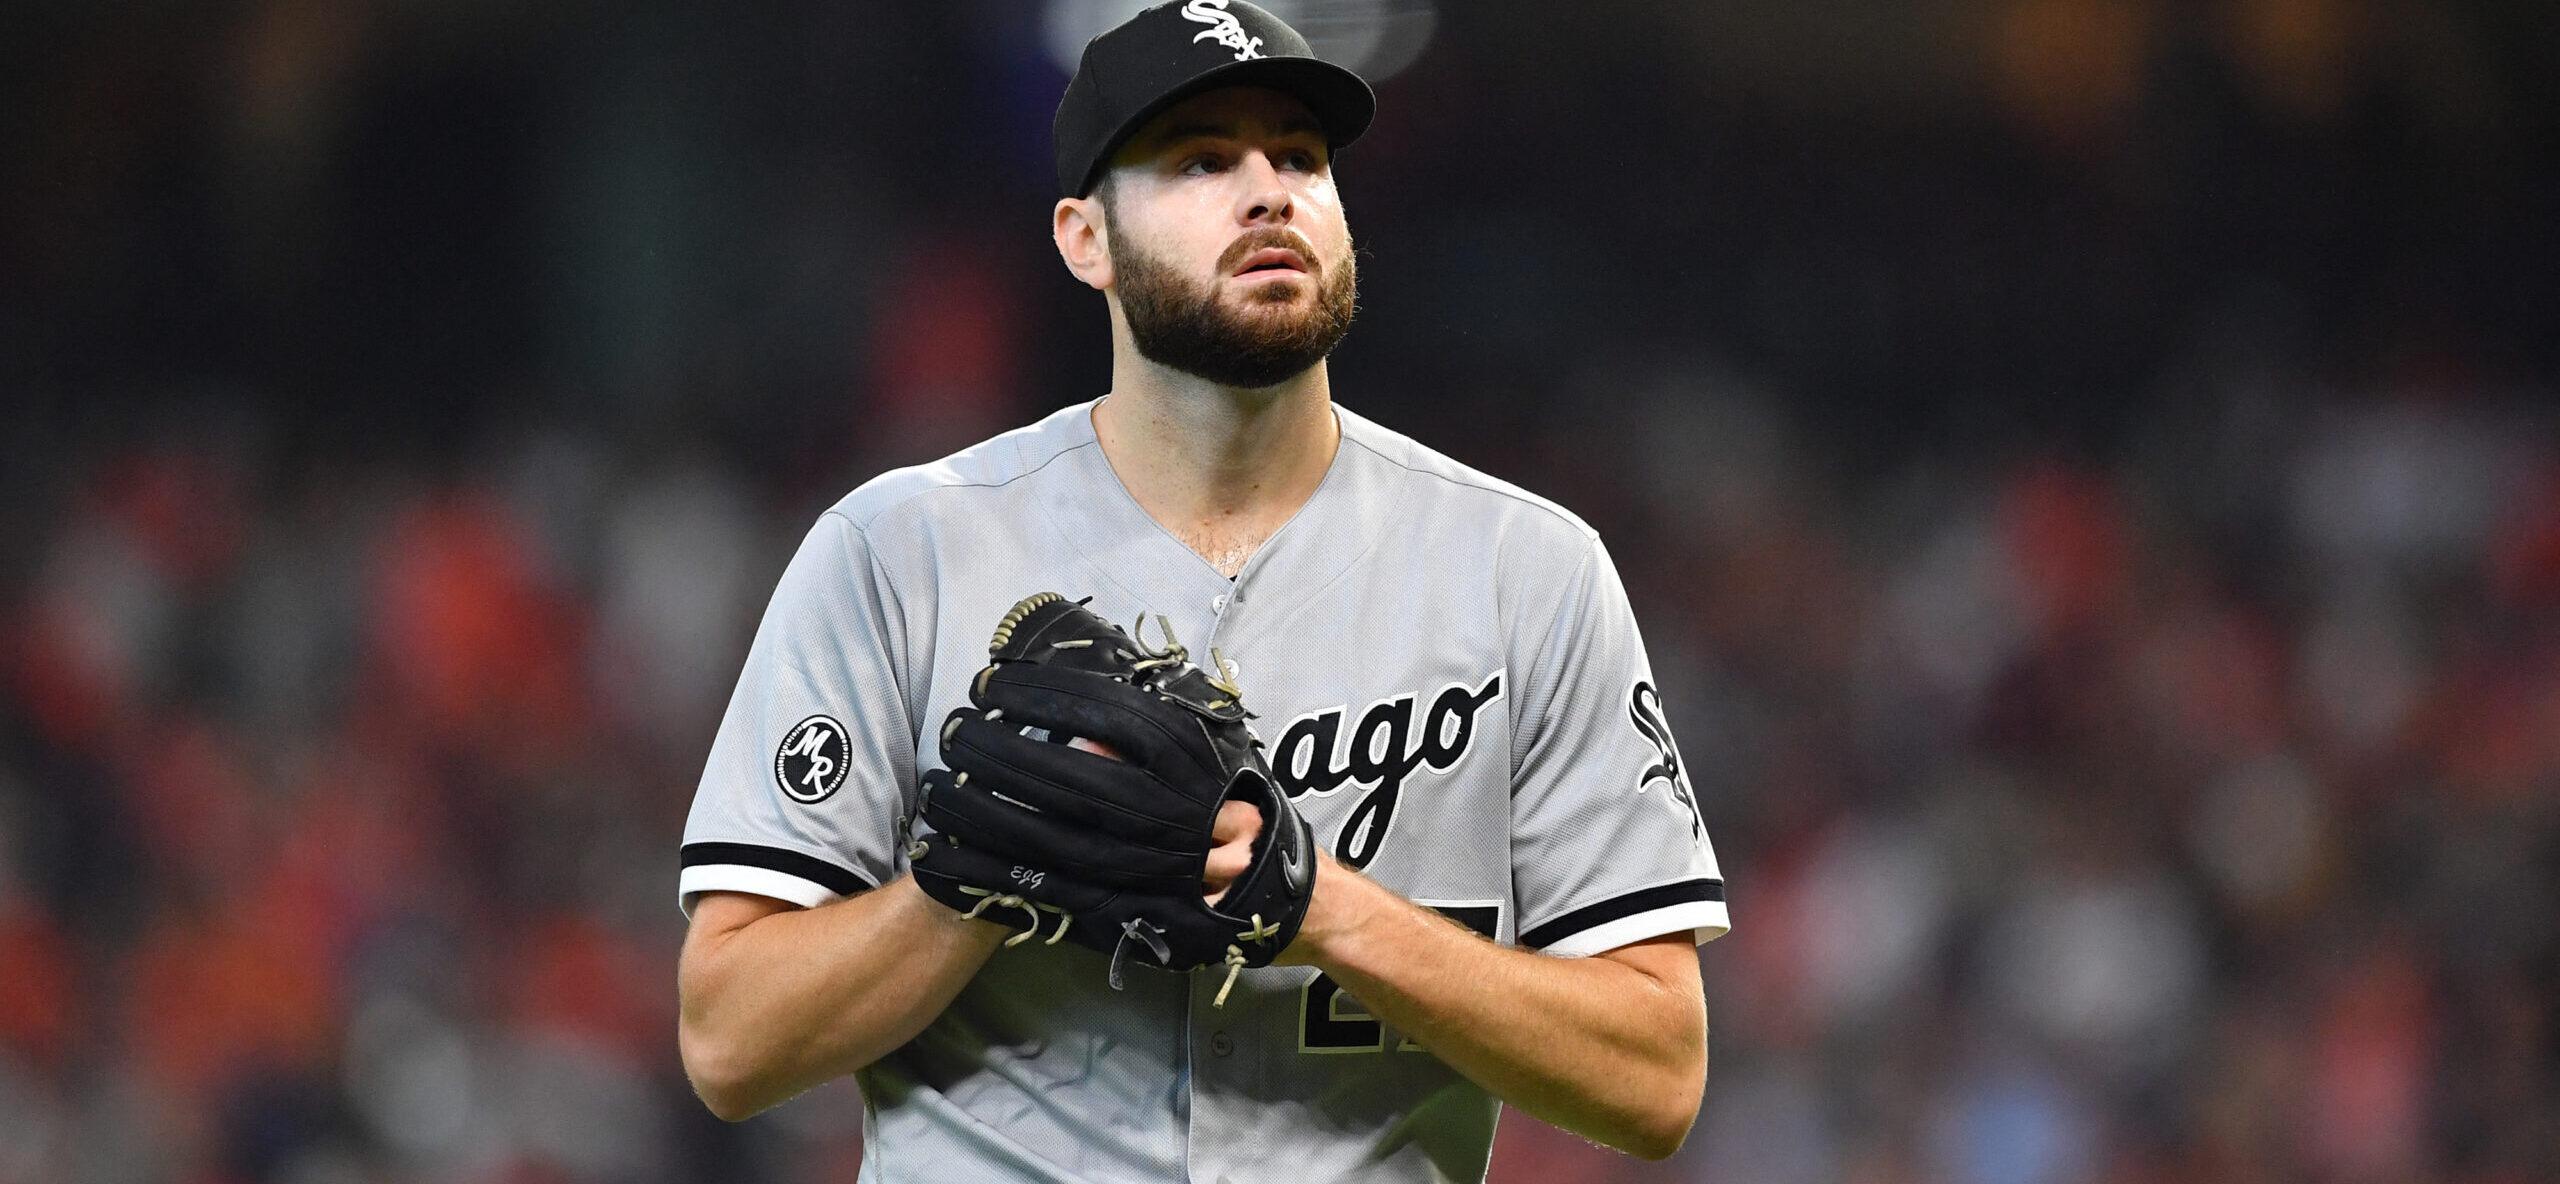 MLB Star Lucas Giolito’s Wife Files For Divorce During All-Star Week